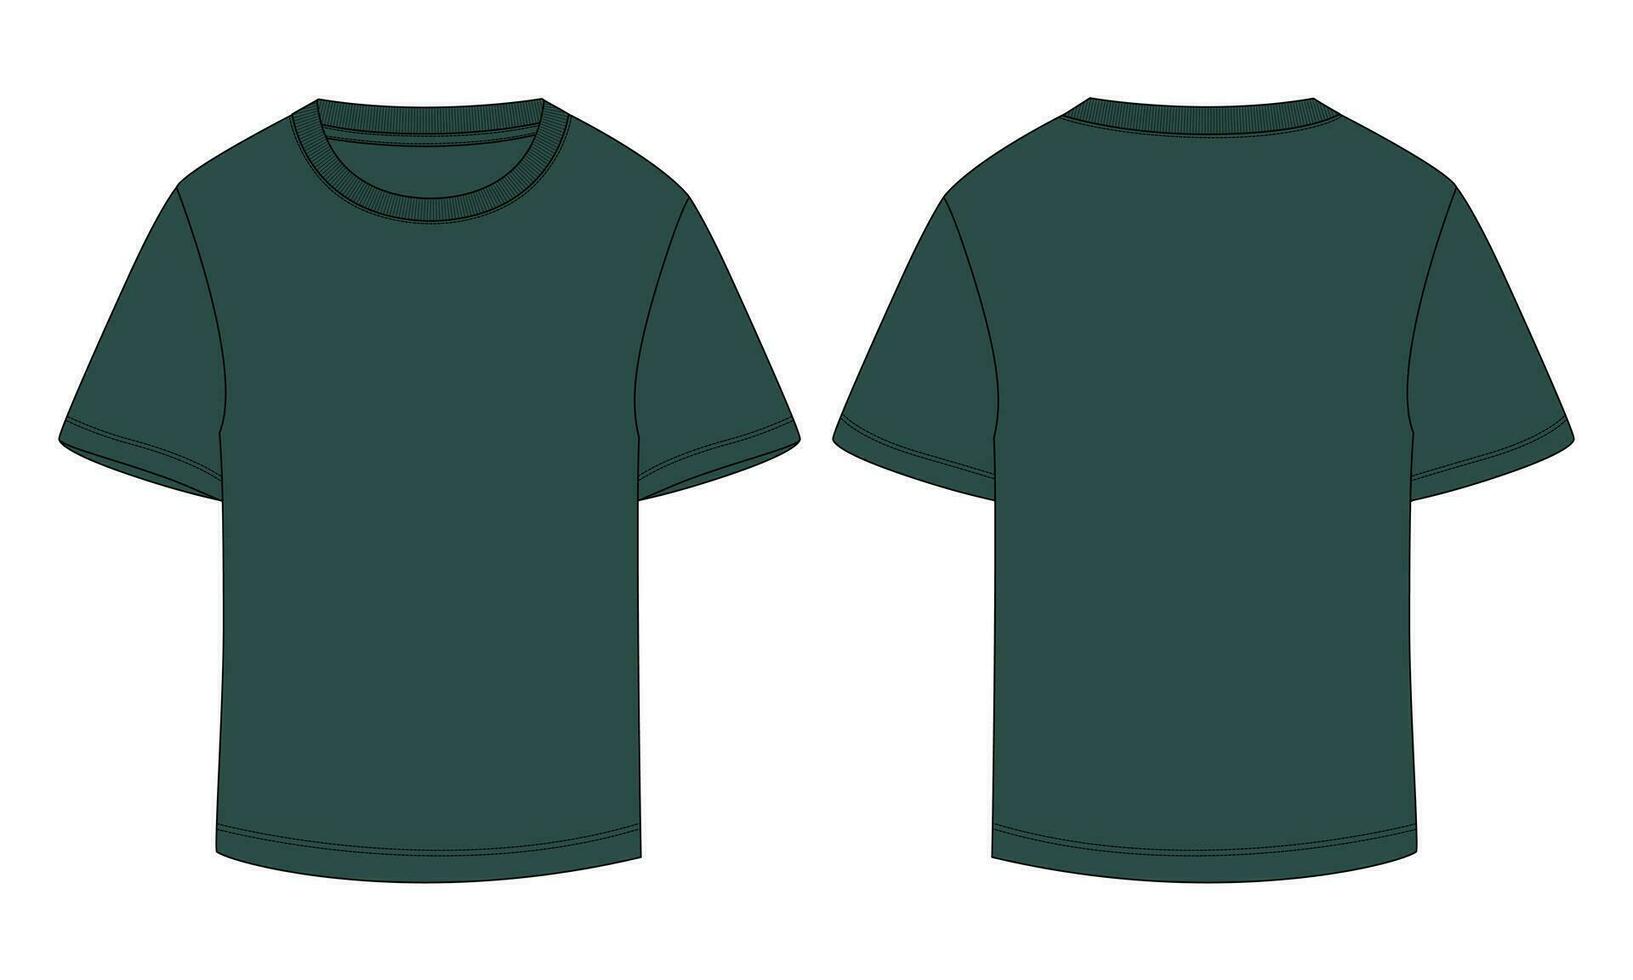 Short sleeve t shirt vector illustration green color template front and back views